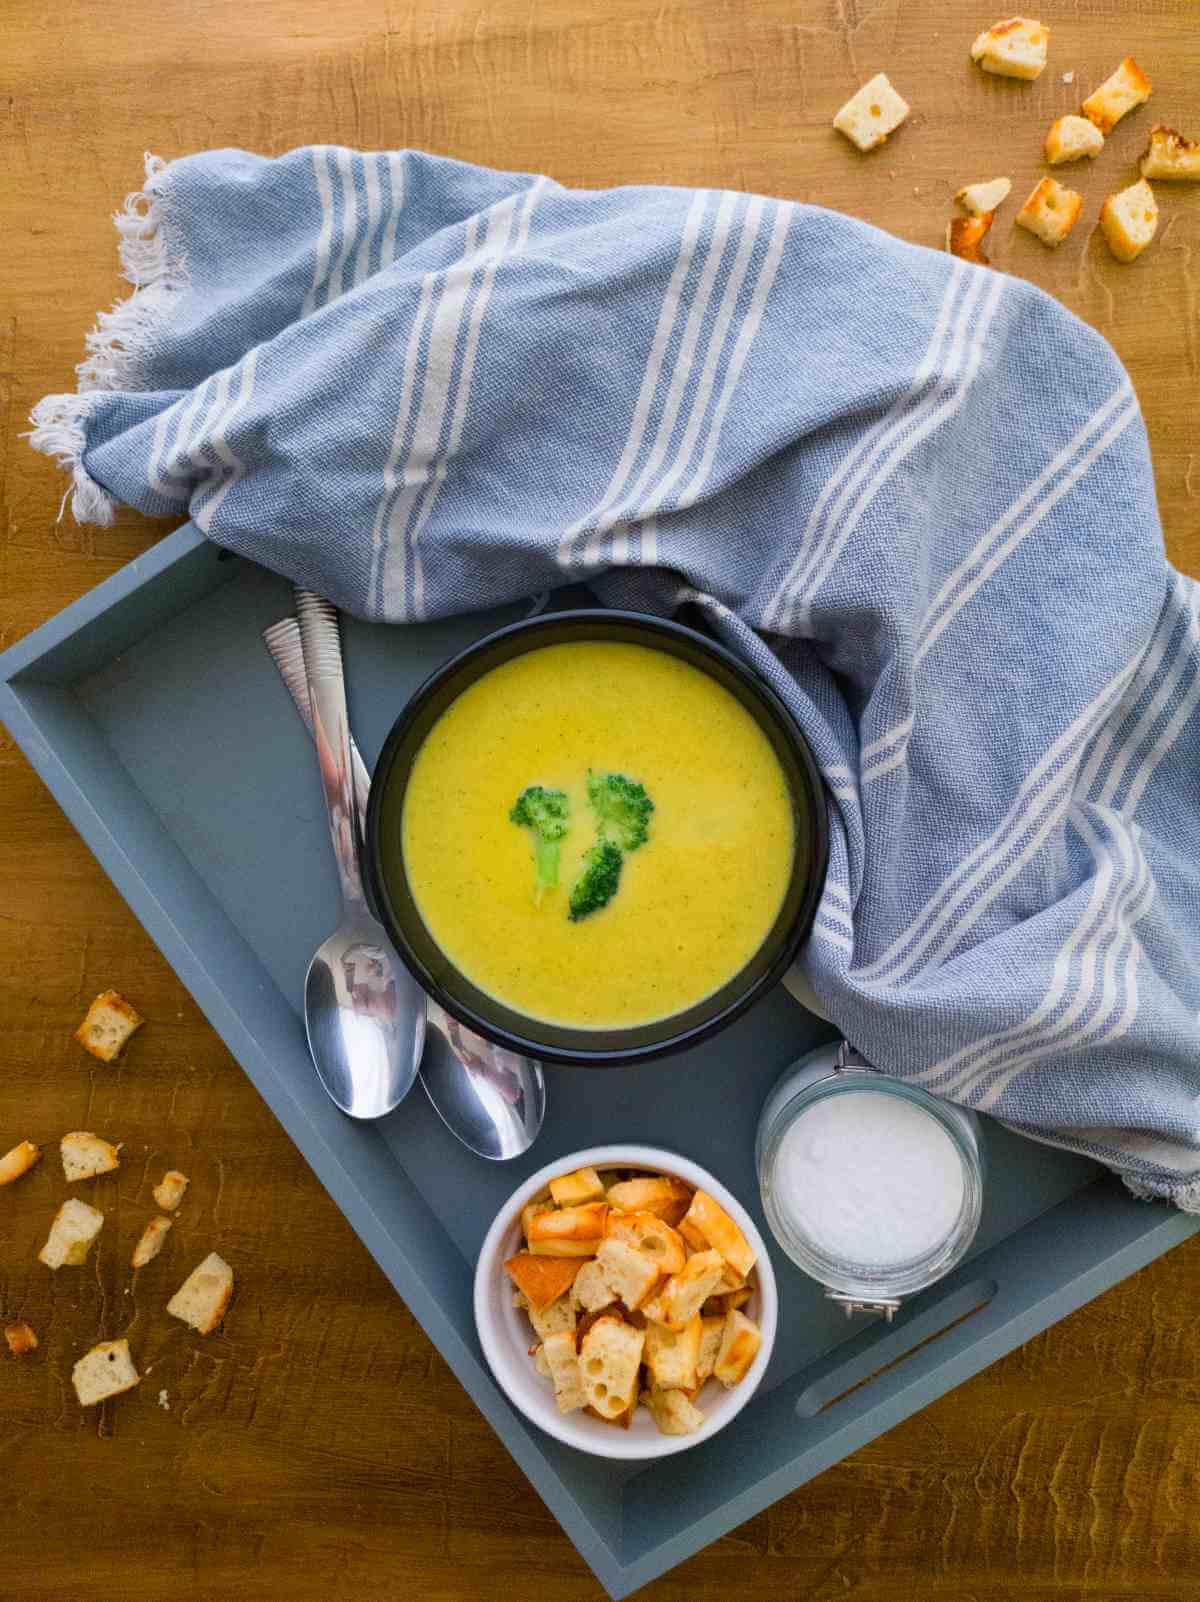 Broccoli Cheddar Soup Vegan with croutons, spoons and a towel on a wooden surface.